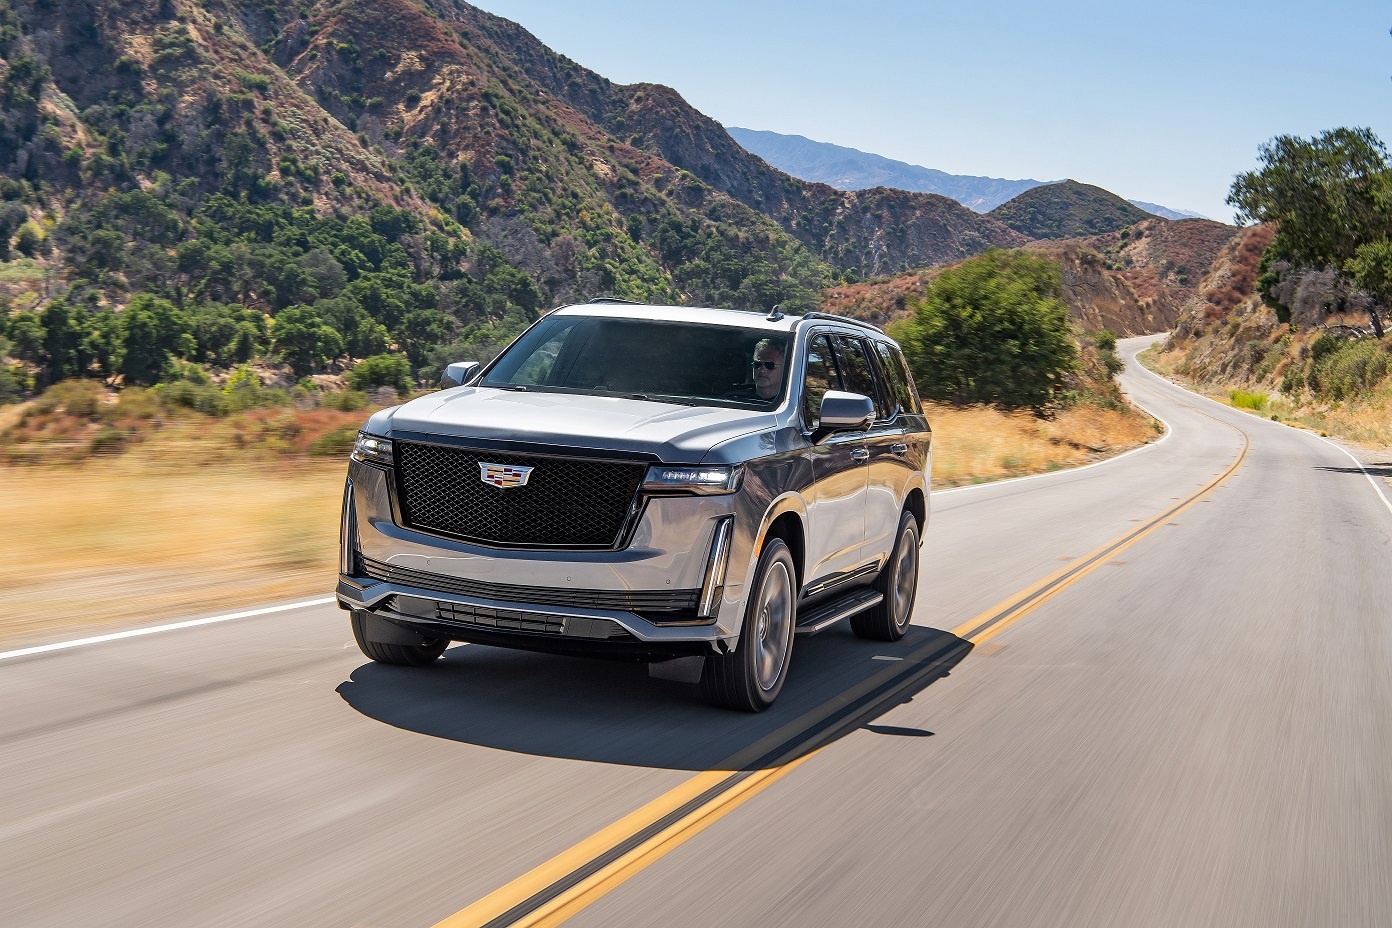 The Iconic 2021 Cadillac Escalade Arrives in the Middle East